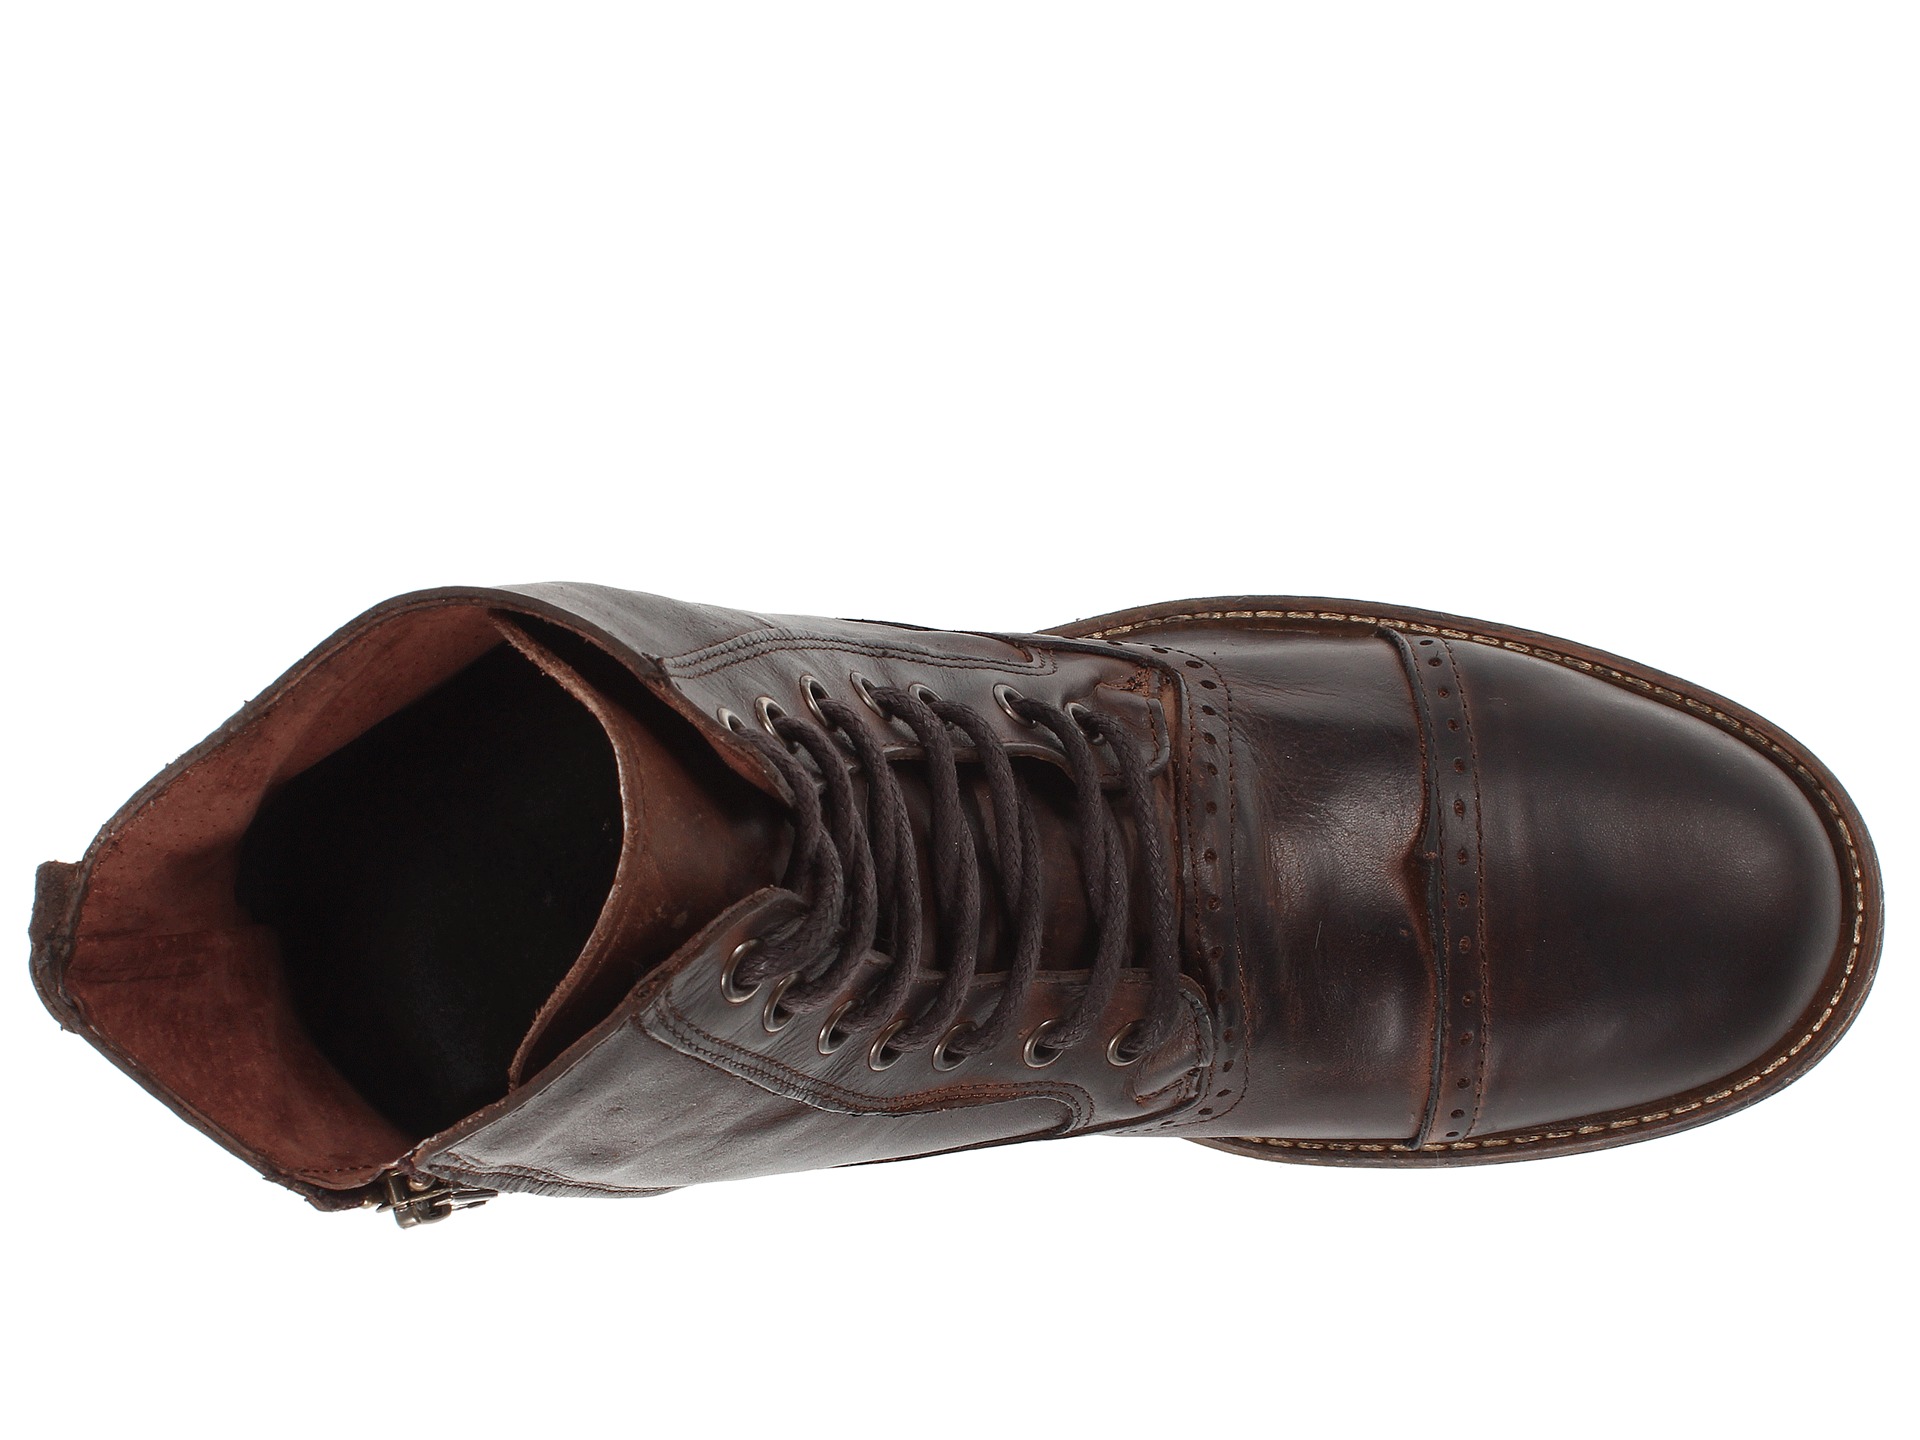 Steve Madden Nathen Brown Leather | Shipped Free at Zappos